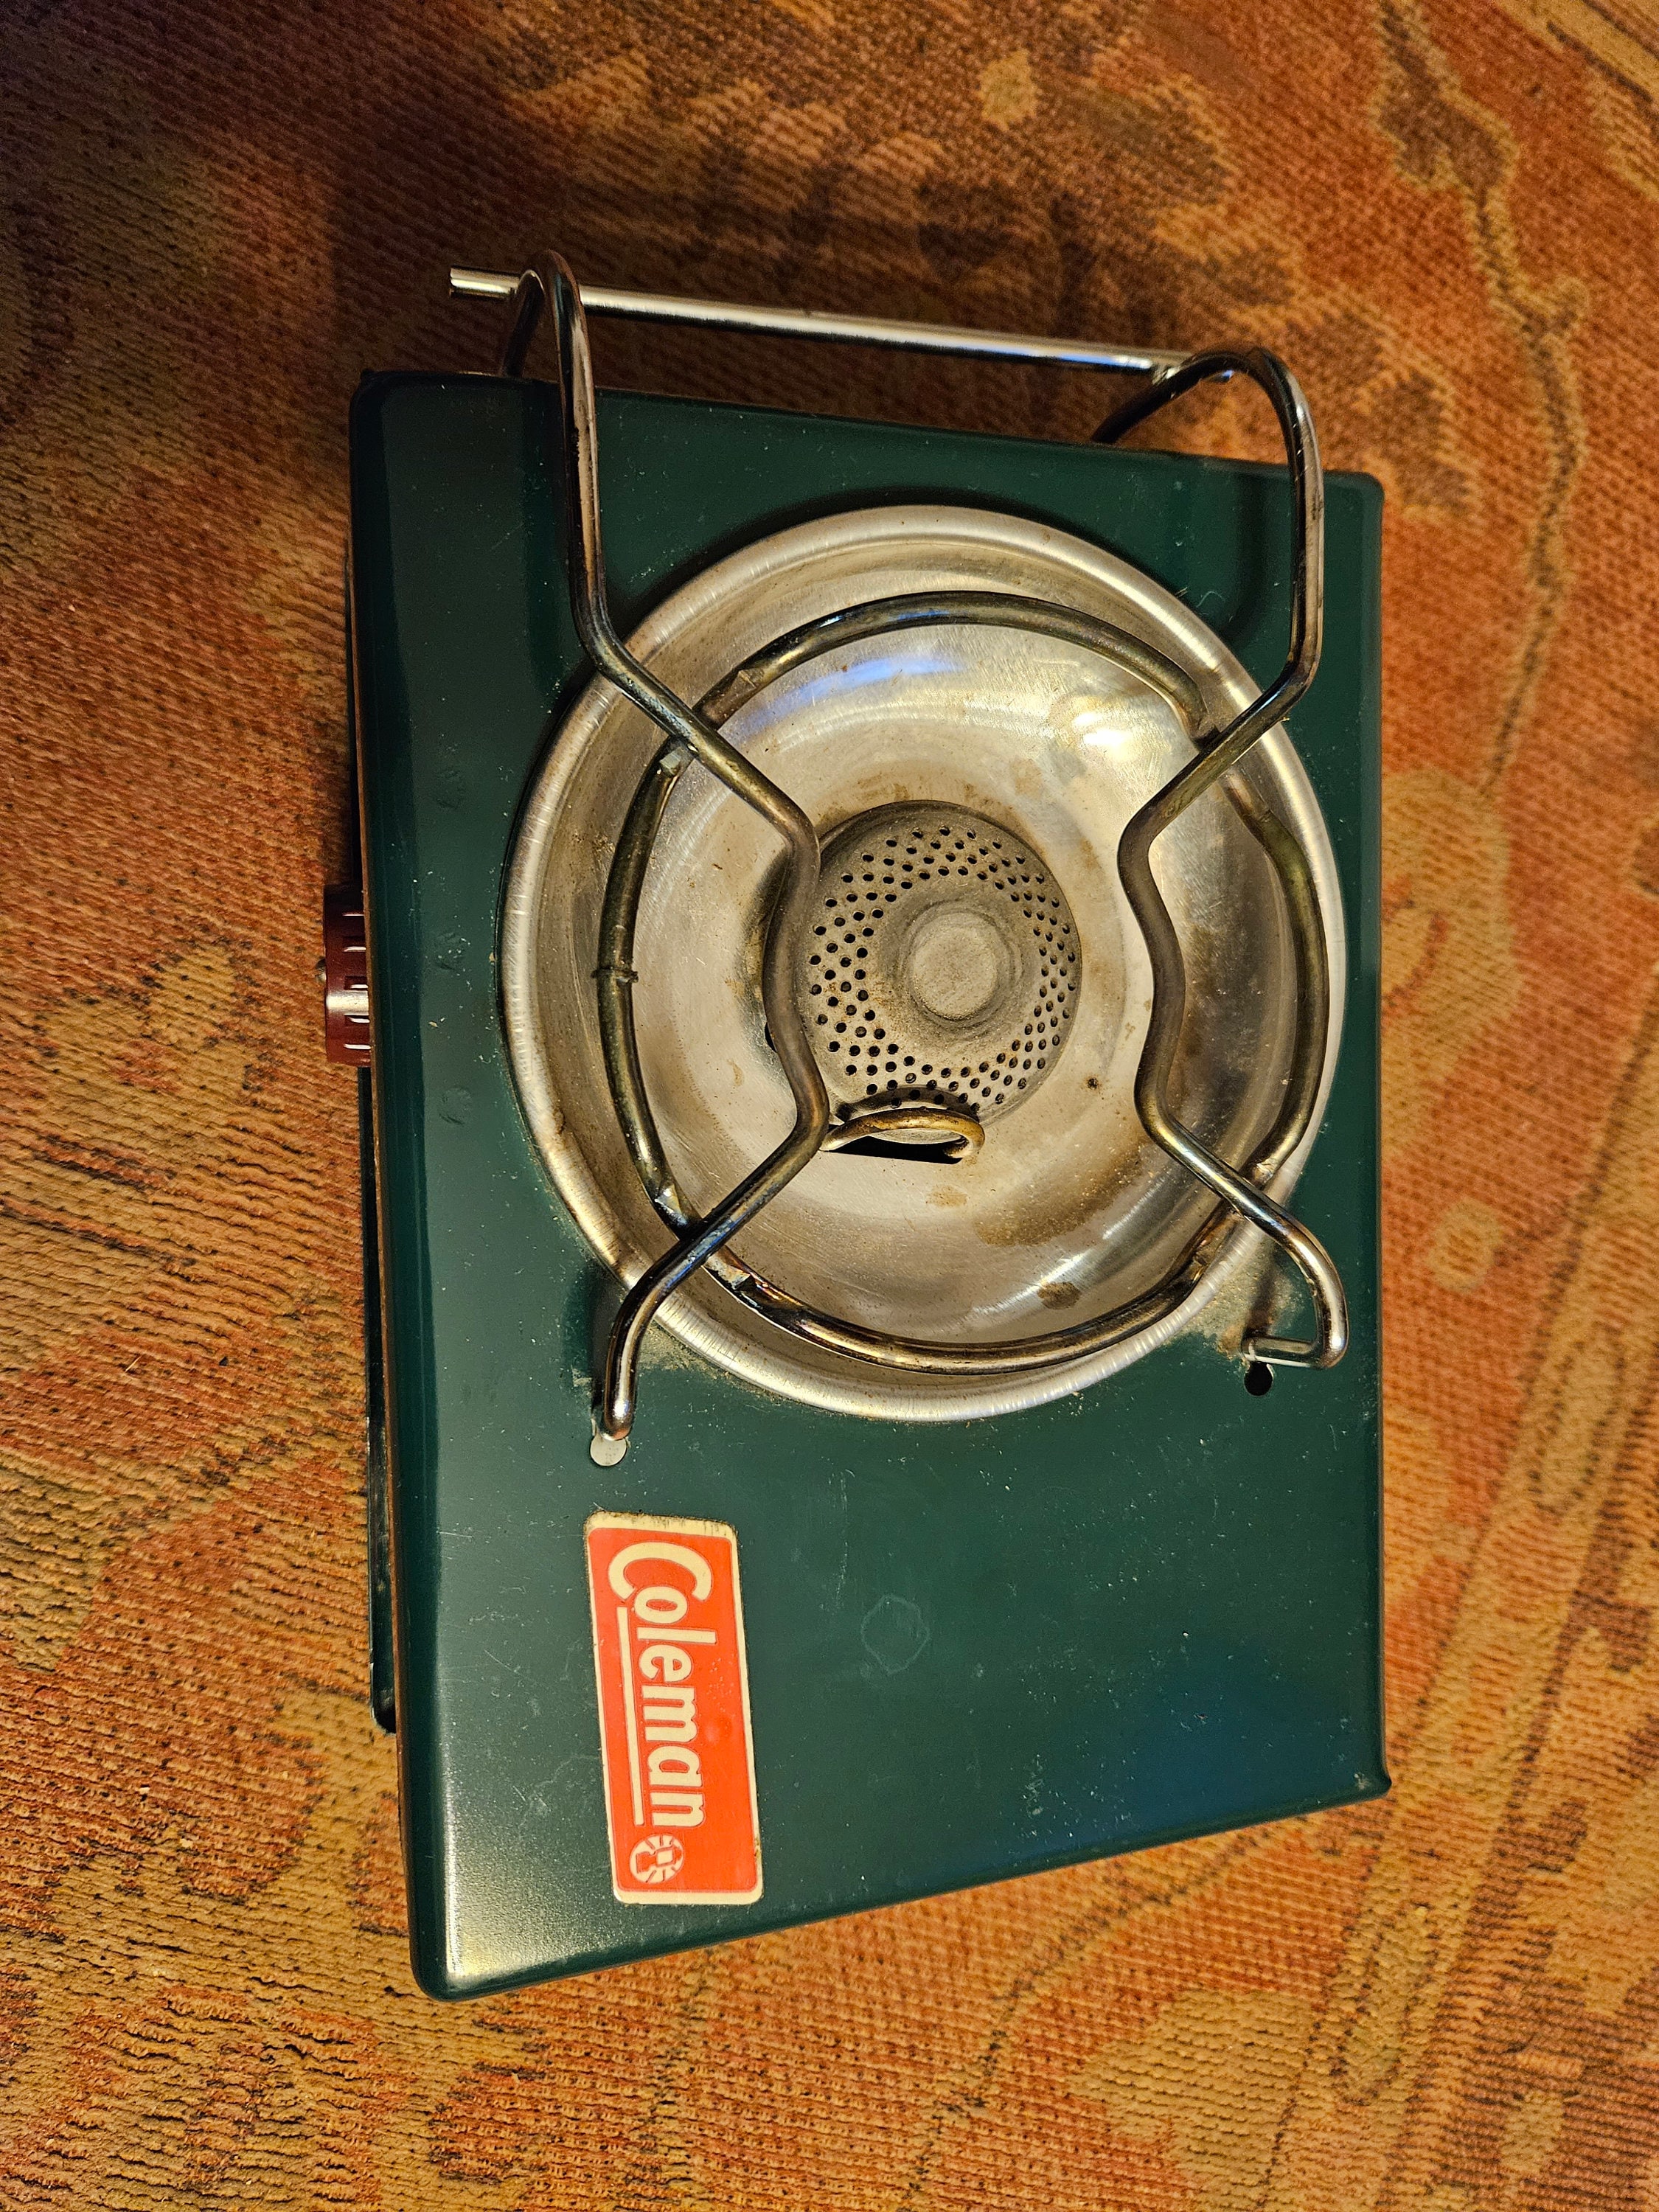 Old Primus Stove kerogaz on Three Burners for Cooking on an Open